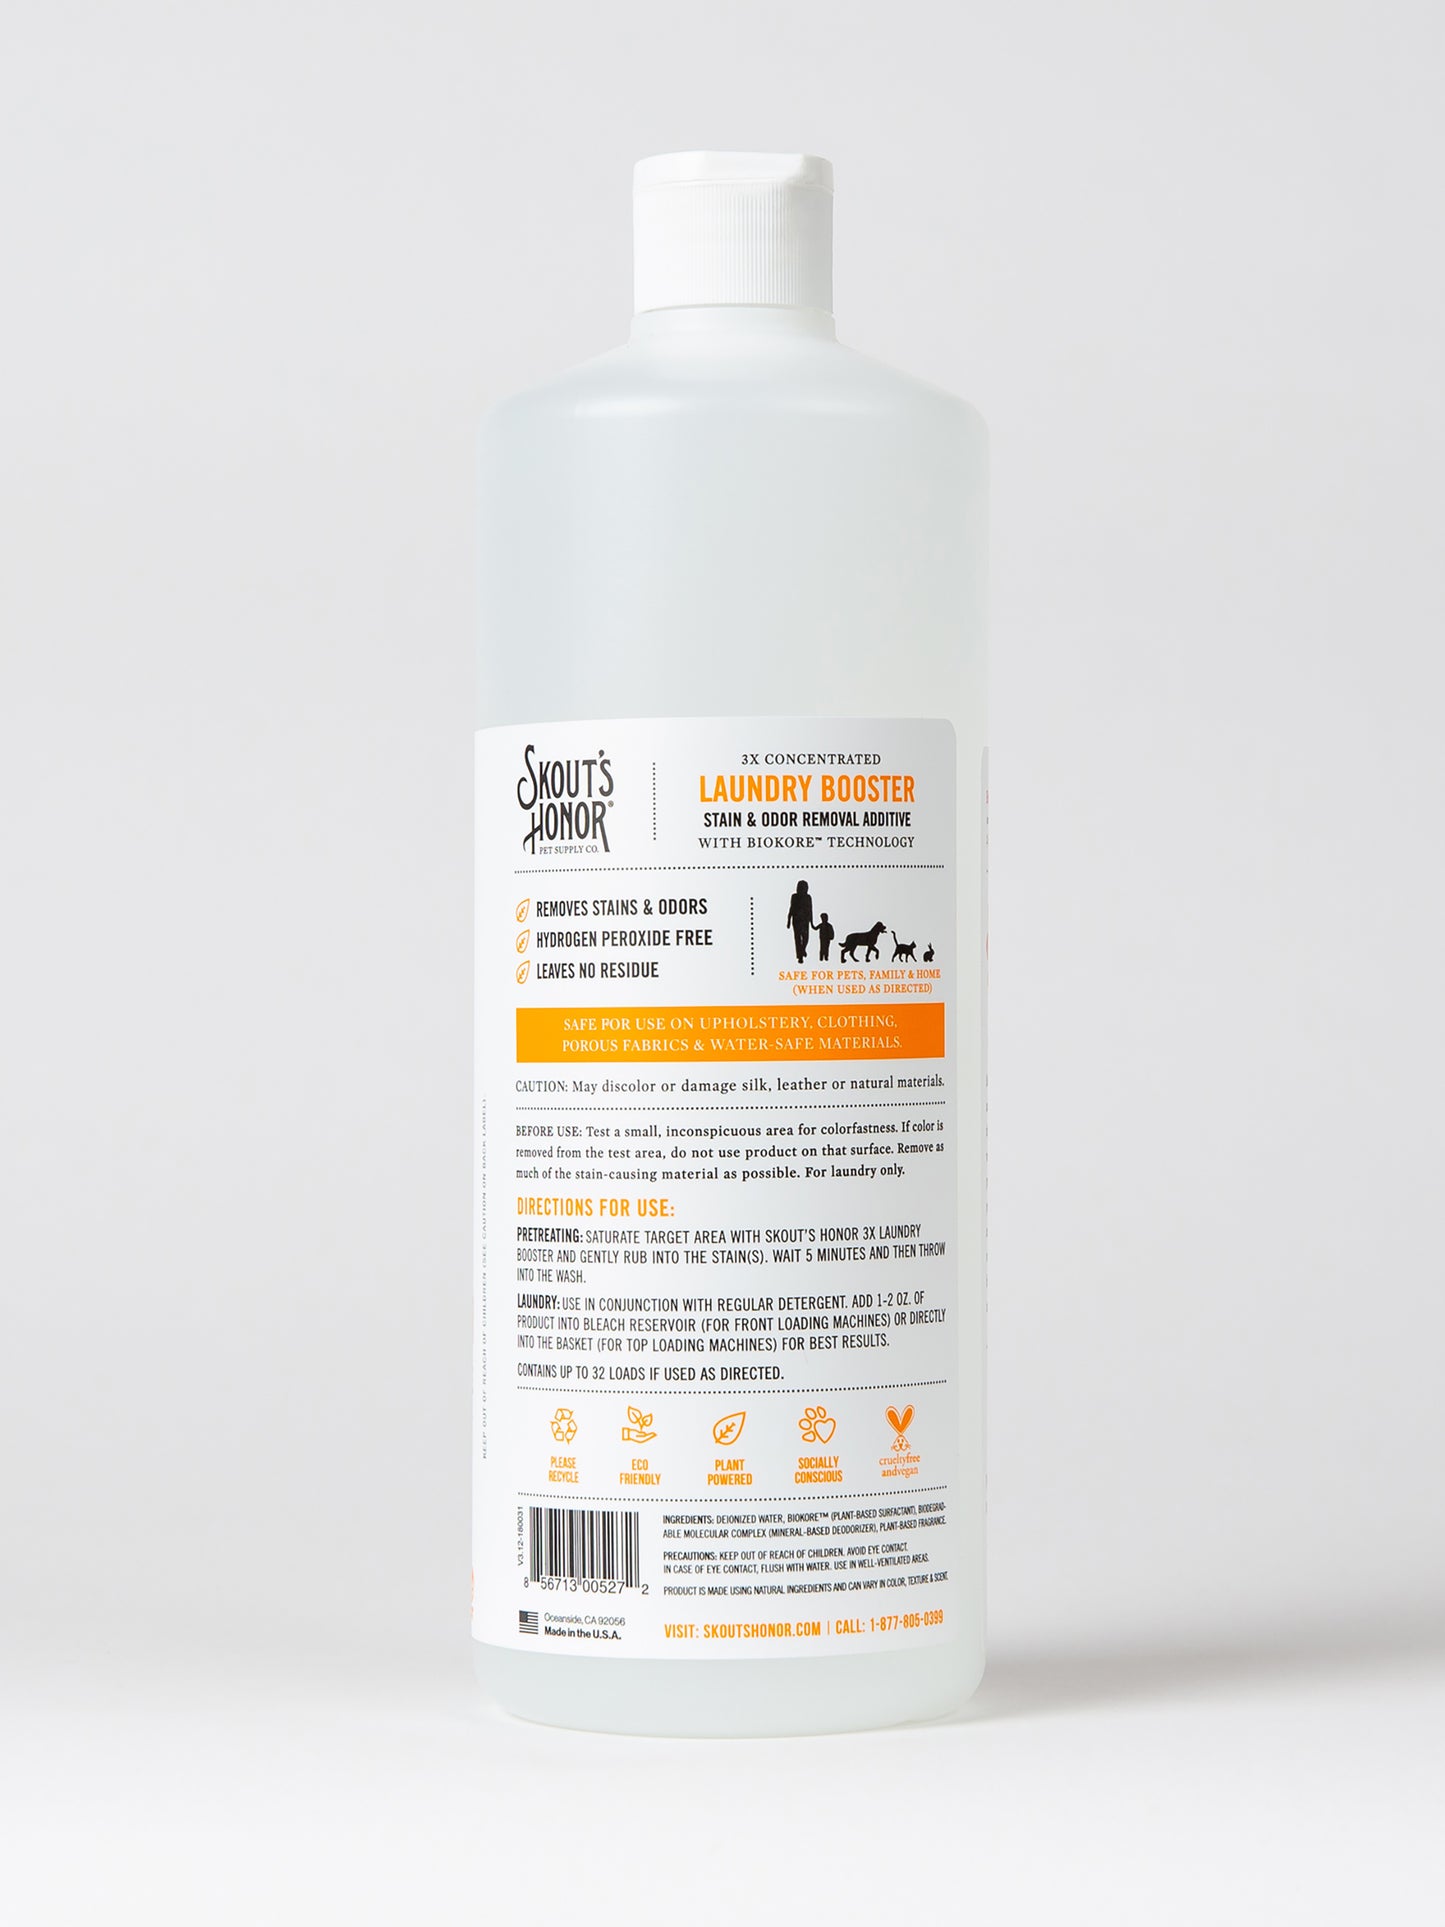 front image from Laundry Booster - Stain & Odor Removal Additive